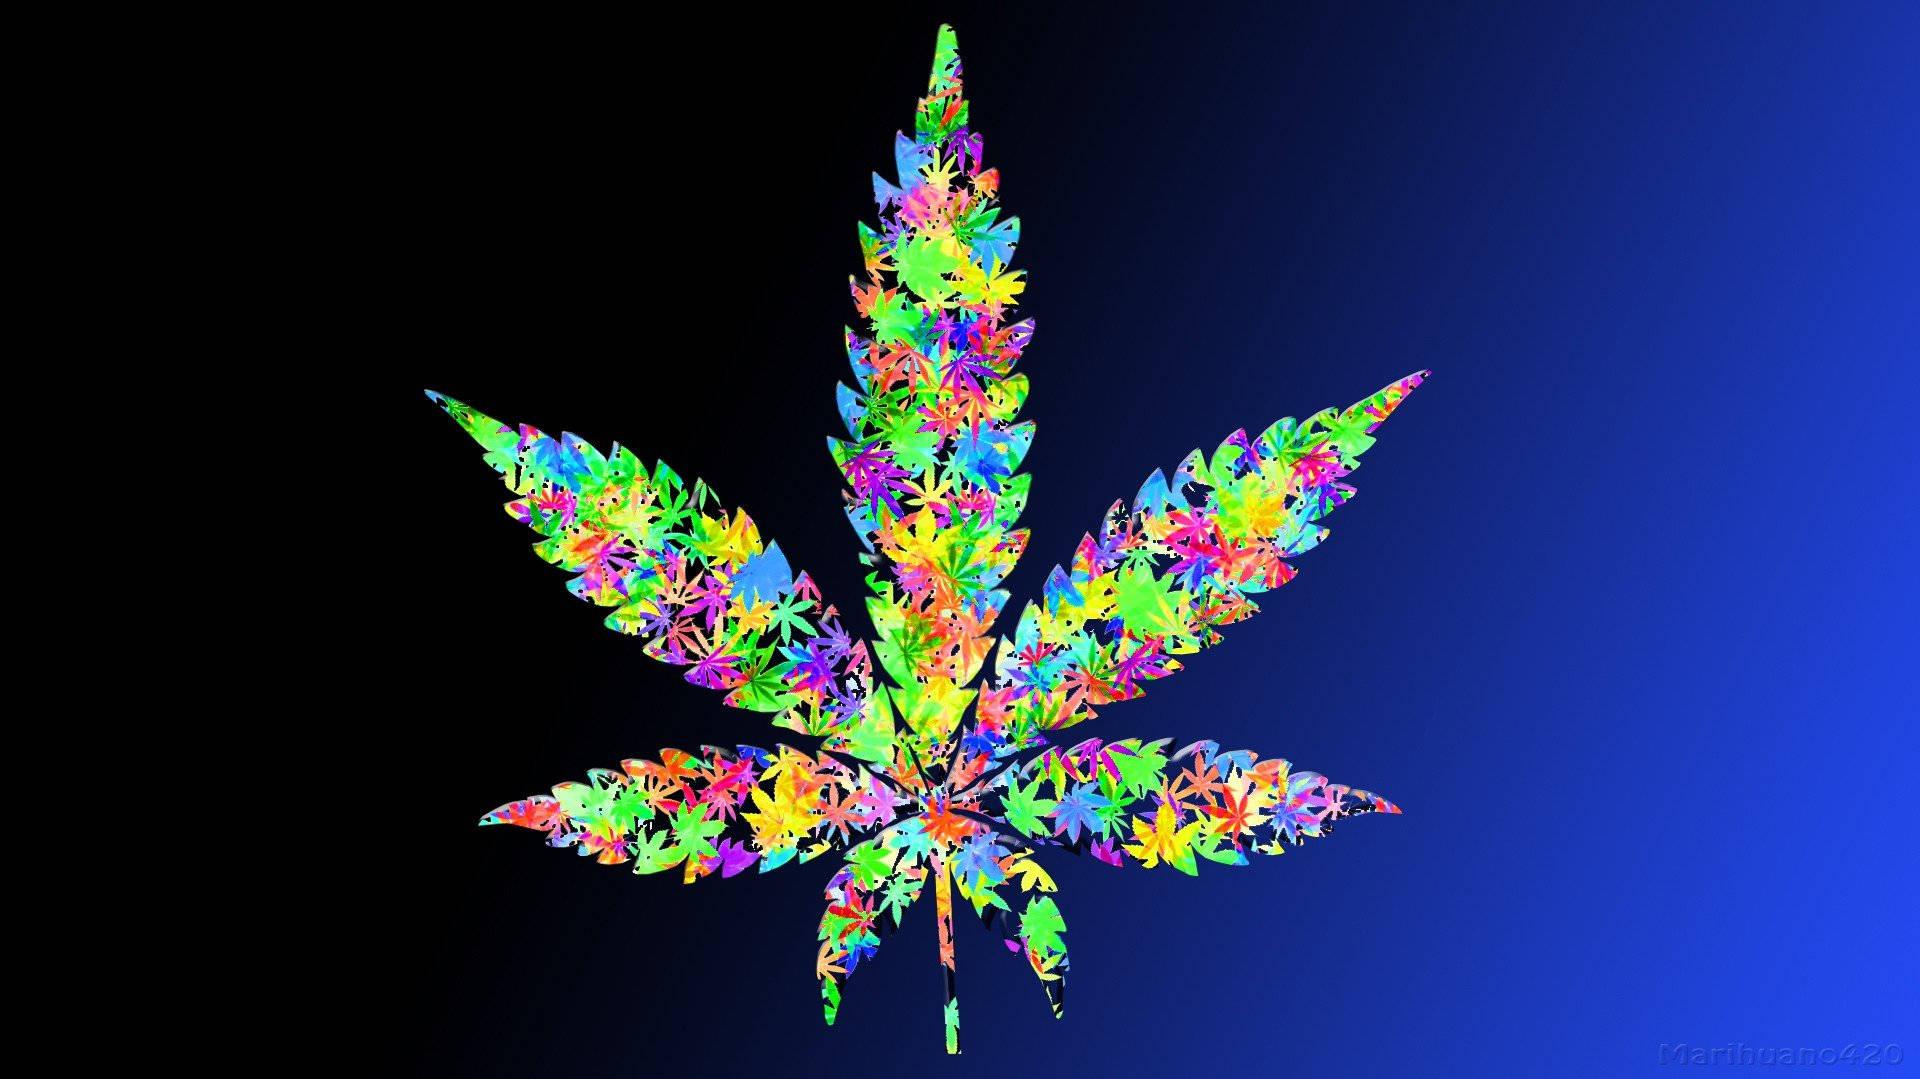 Cool Weed Wallpaper For